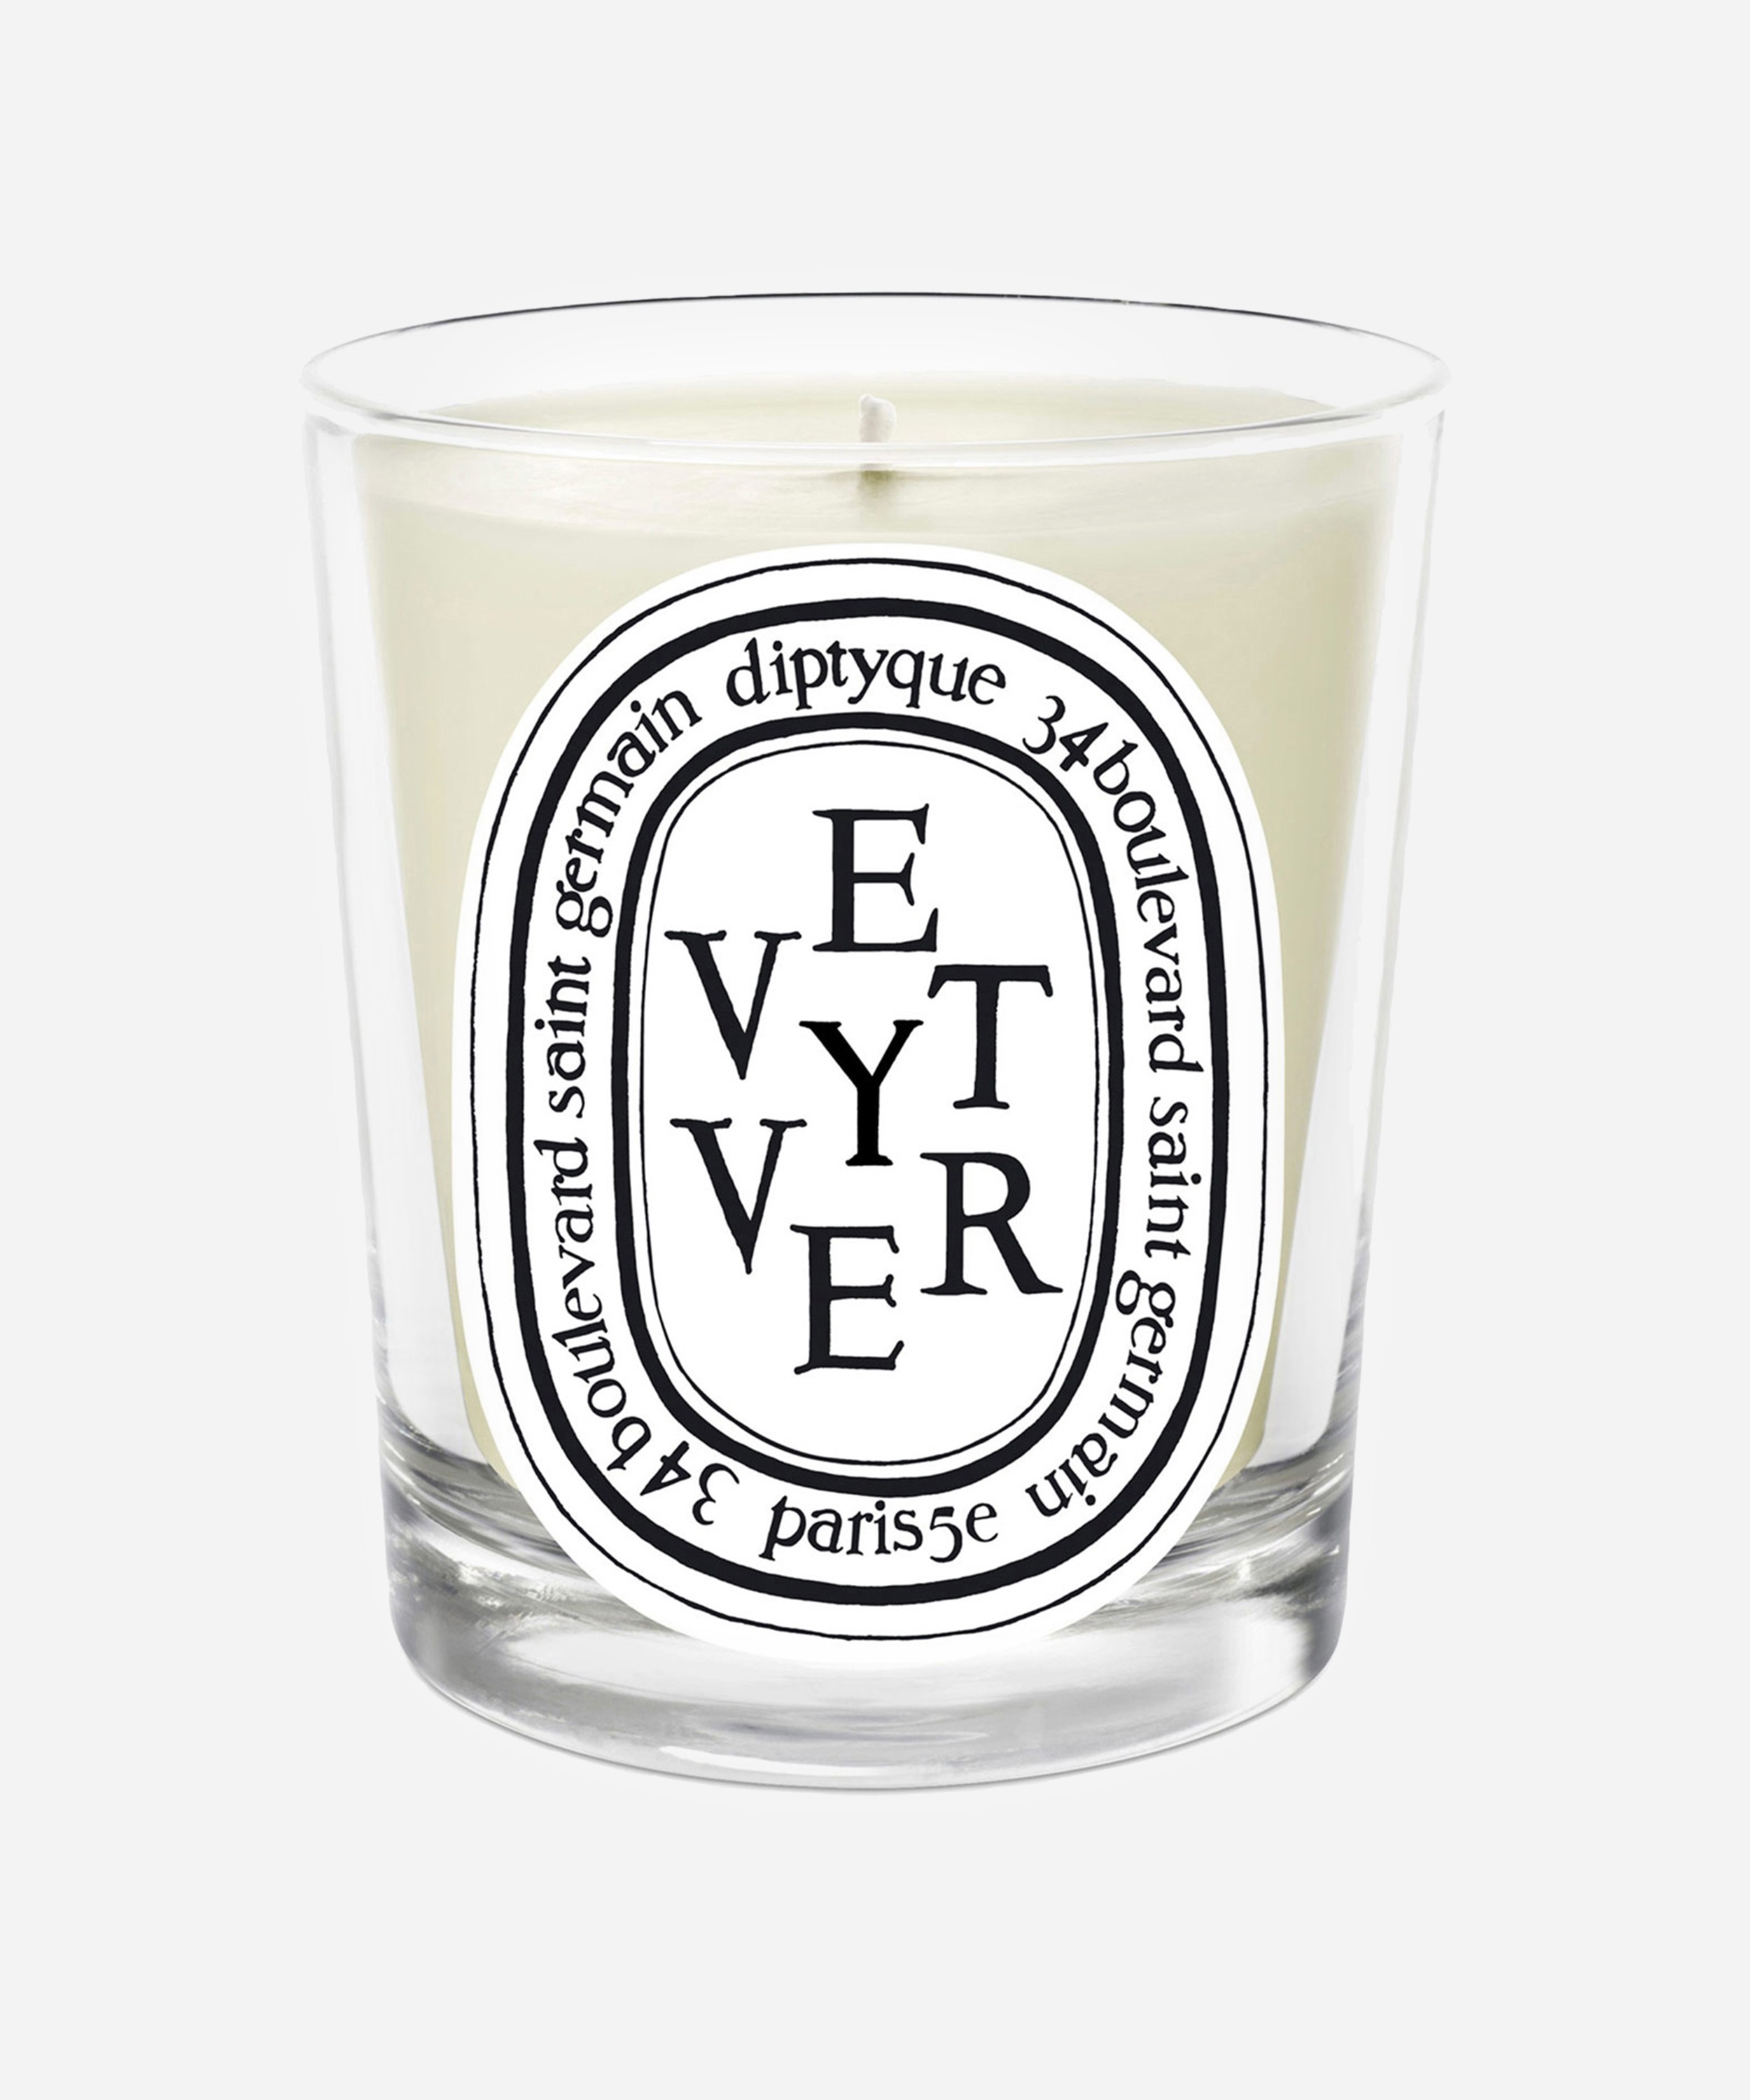 Diptyque - Vetyver Scented Candle 190g